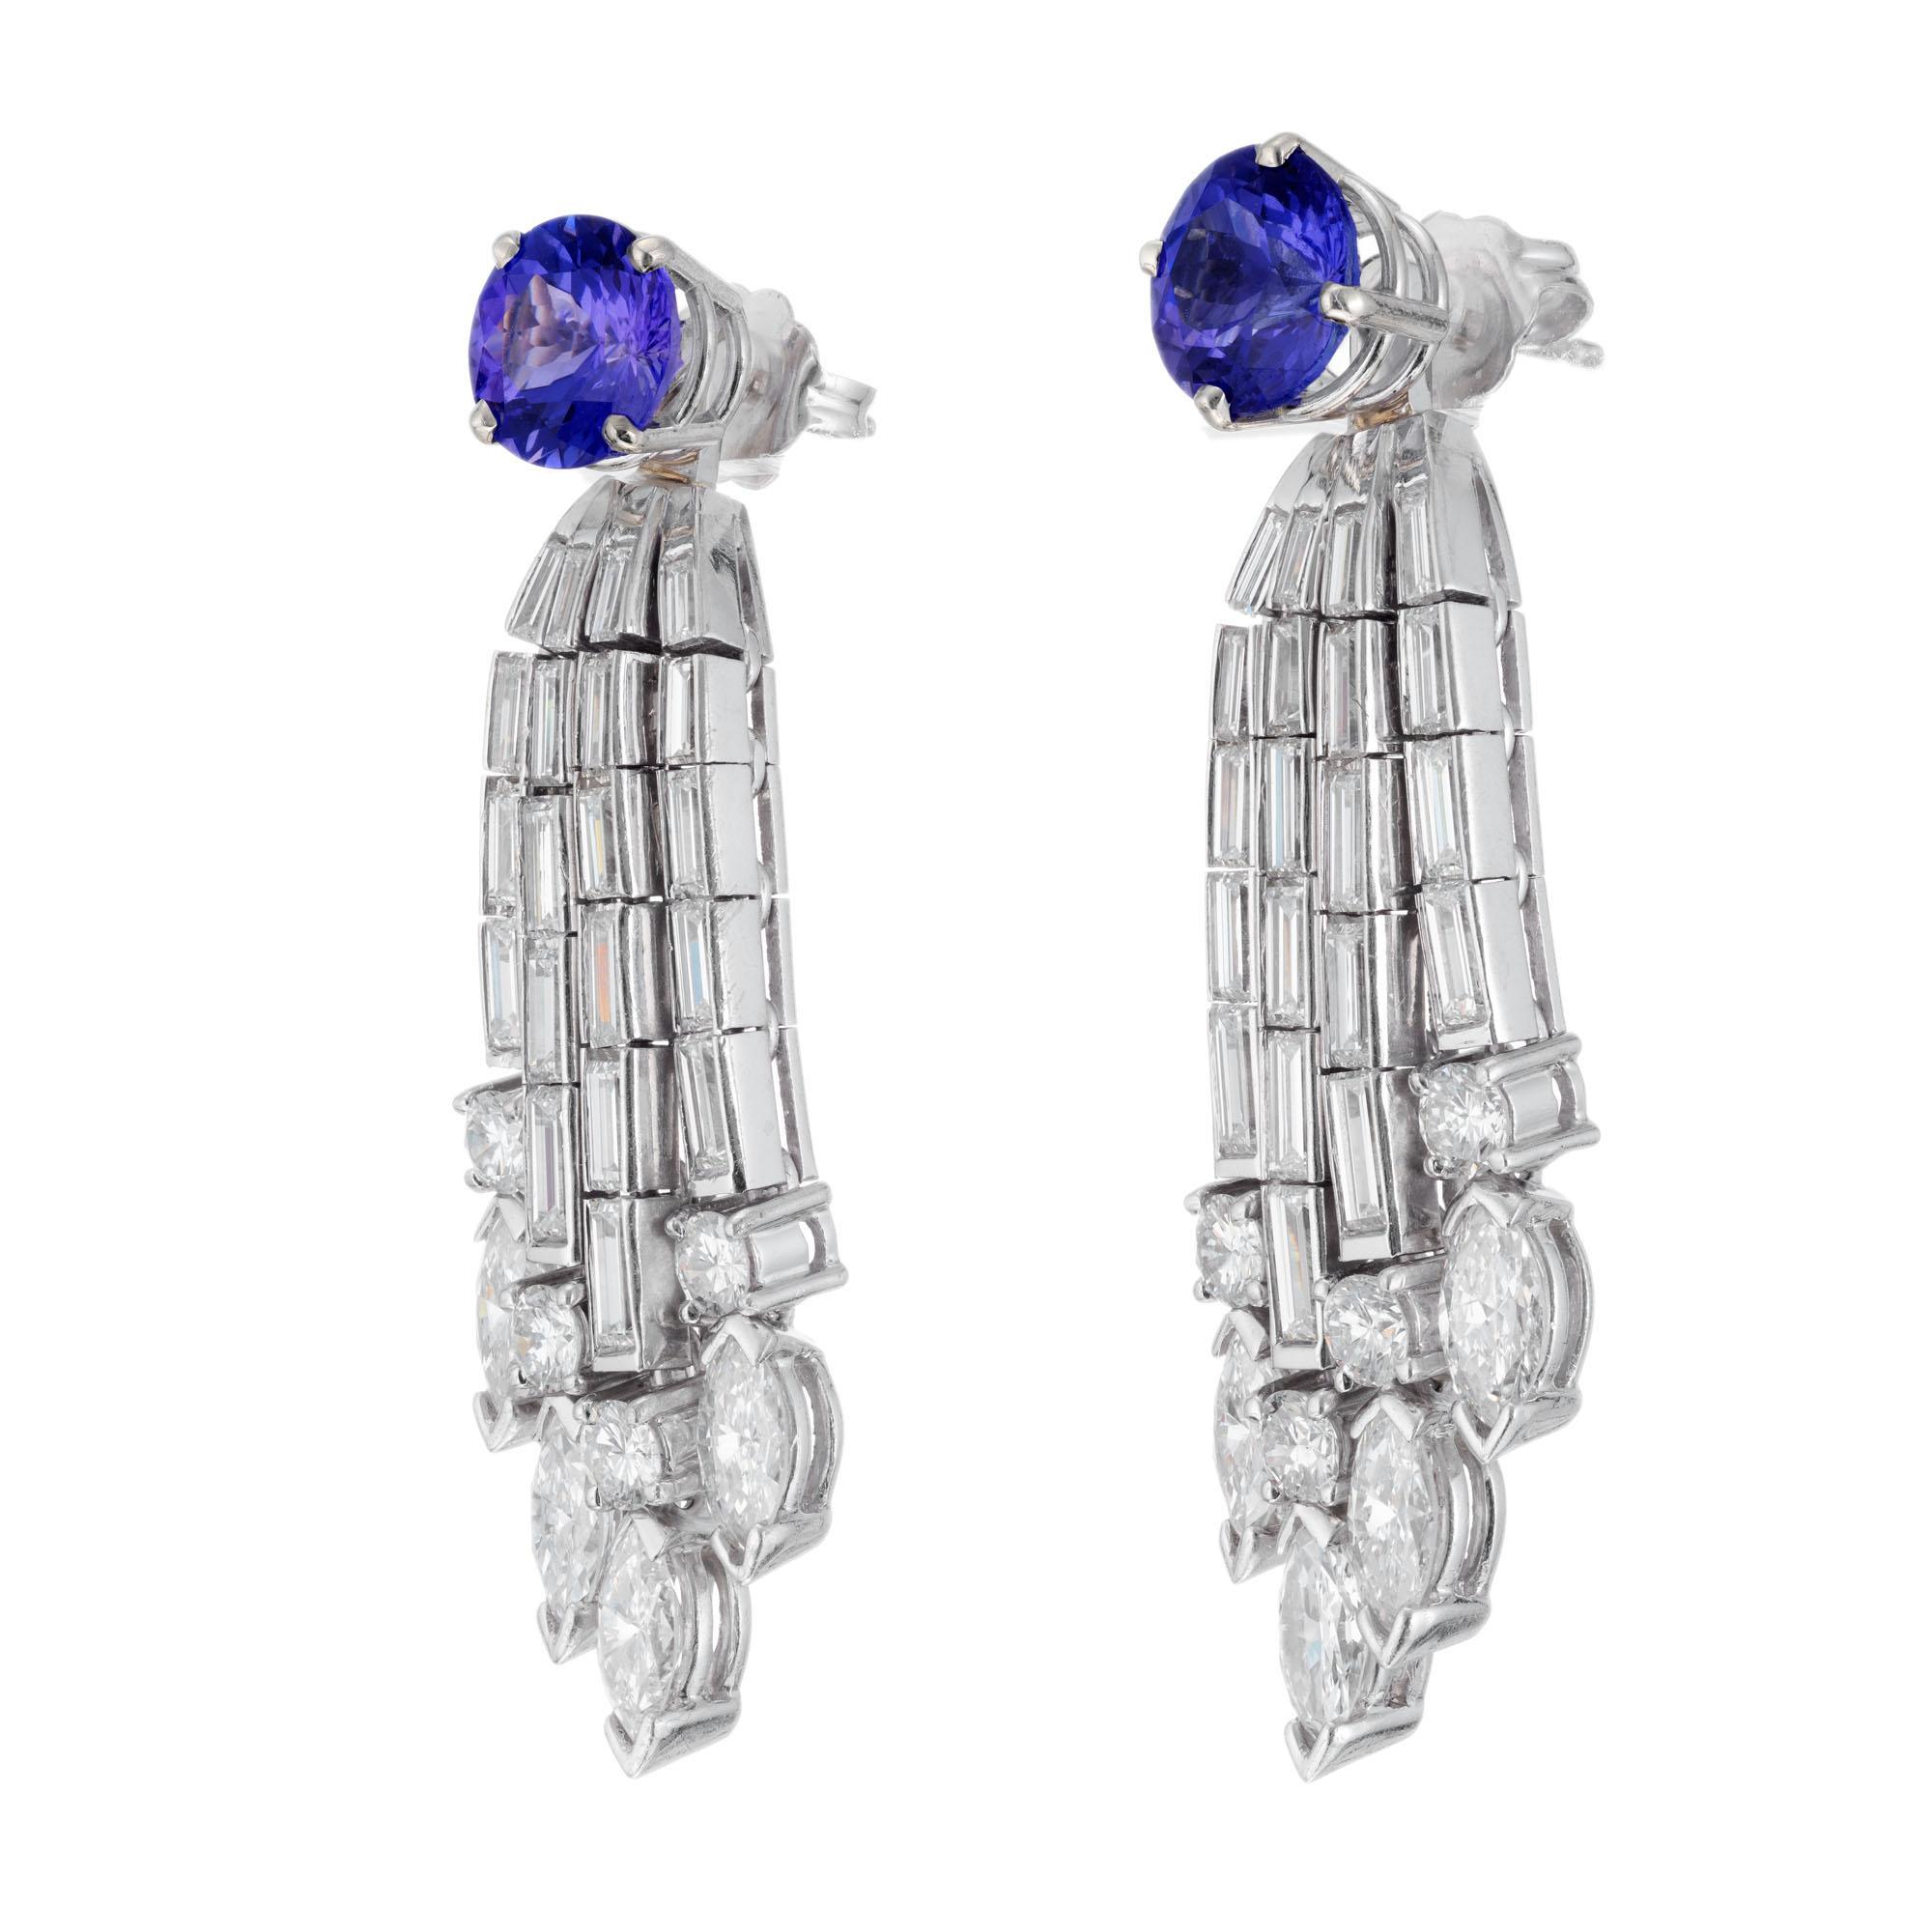 1960's Tanzanite and diamond earrings. 2 round tanzanite studs with 34 baguette, 8 marquise and 8 round accent diamonds. Flexible removable drop dangles. Platinum and 14k white gold. Earrings can be worn as tanzanite studs or with diamond drop